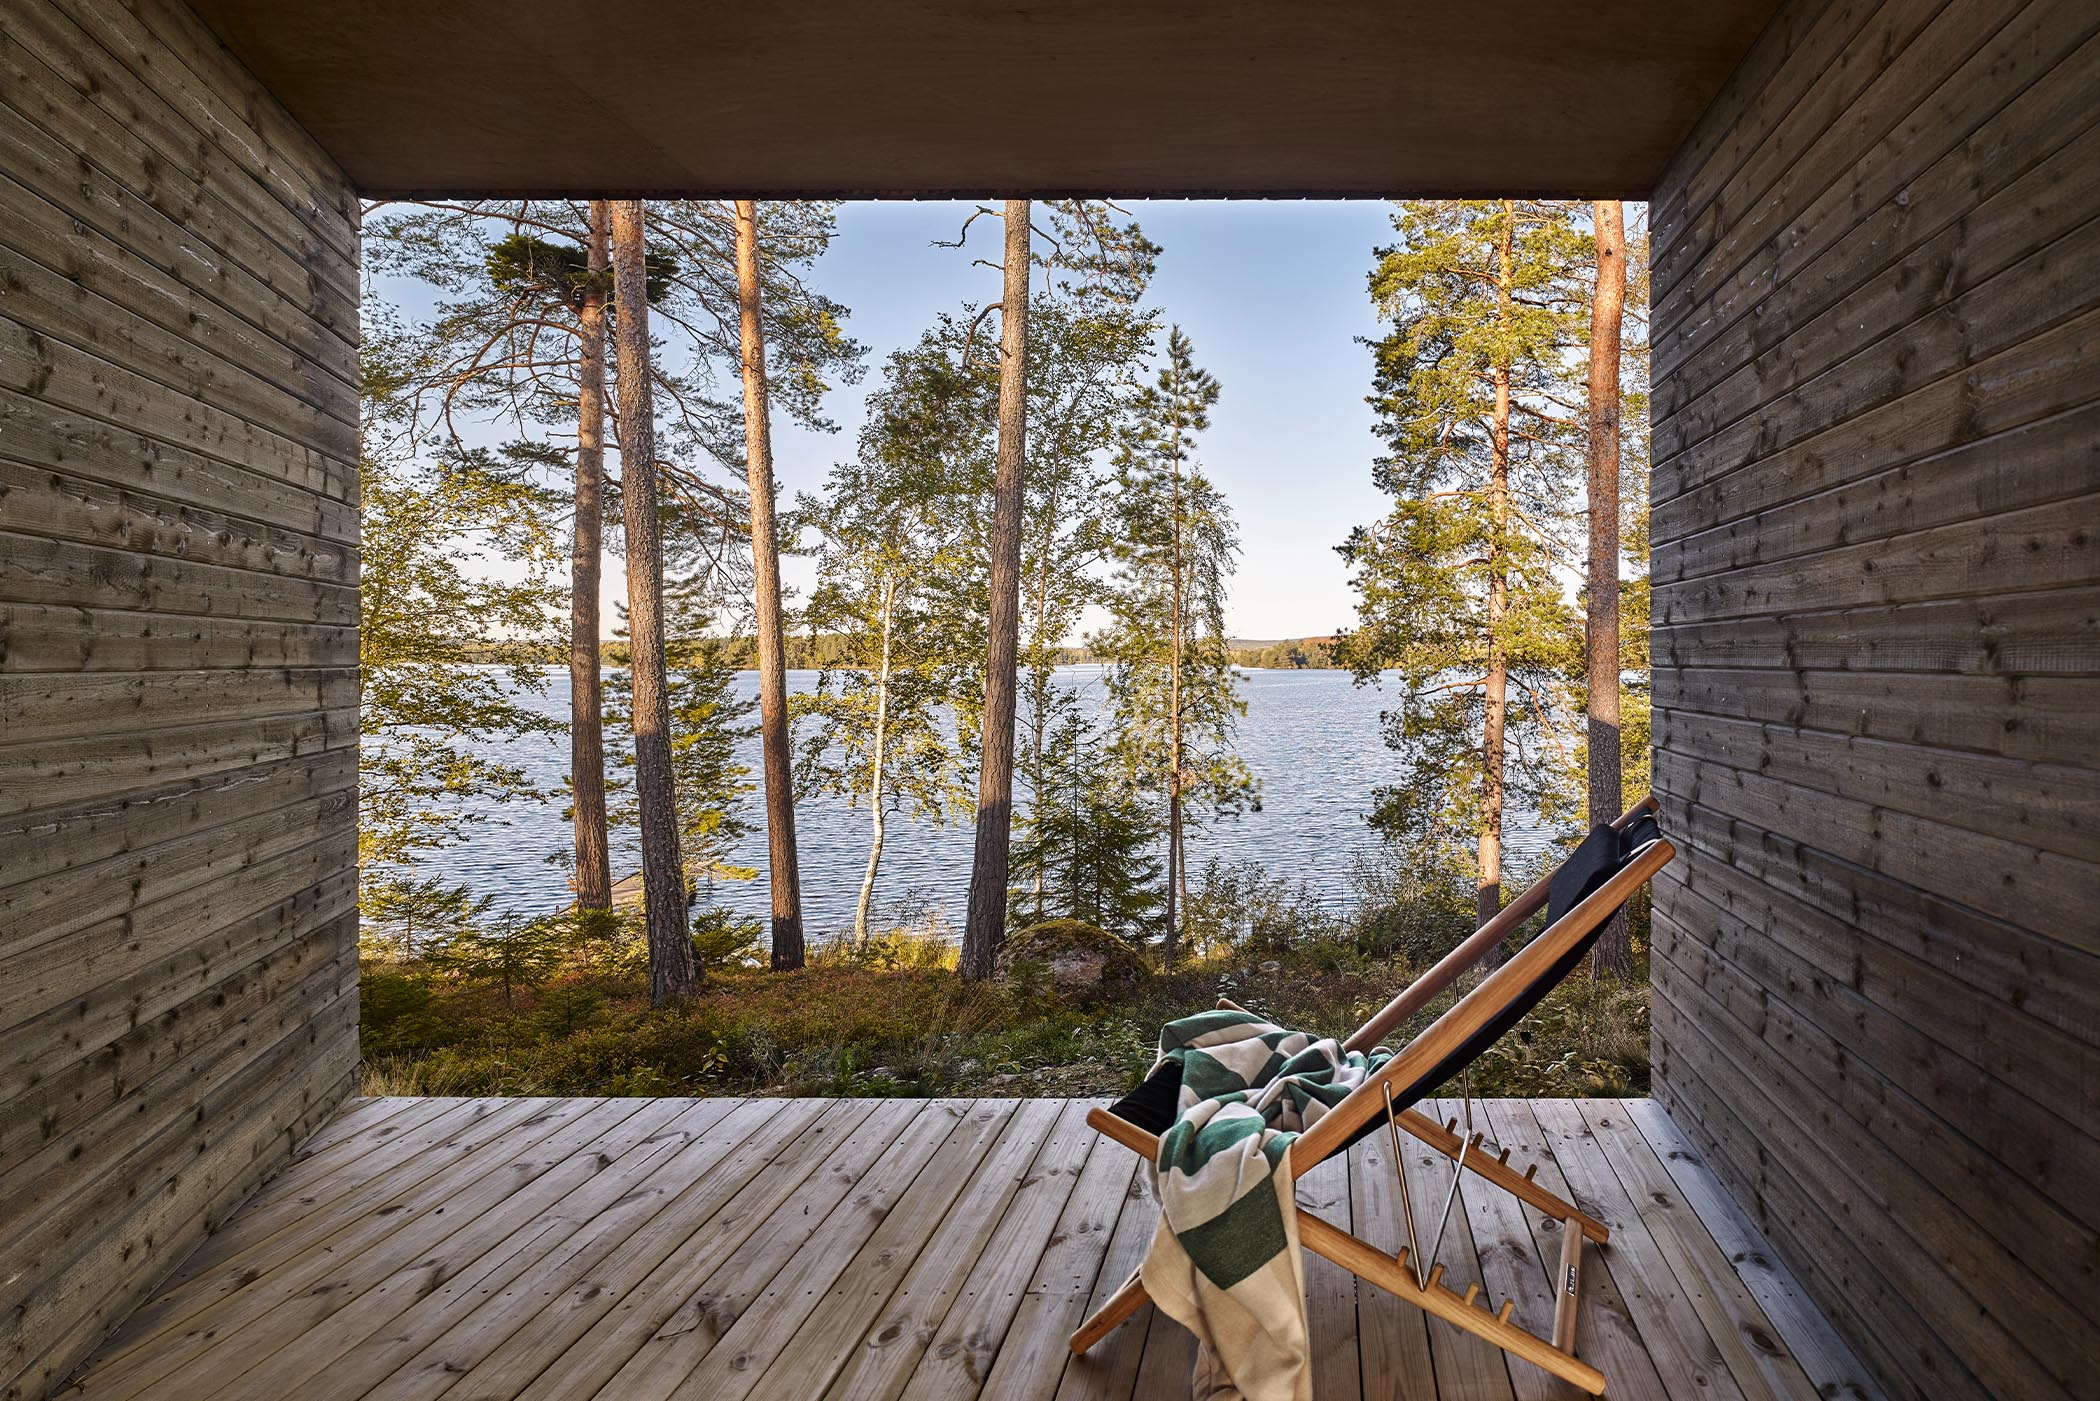 The Dalarna House was designed by Dive Architects. You can enjoy some amazing homes on our website.